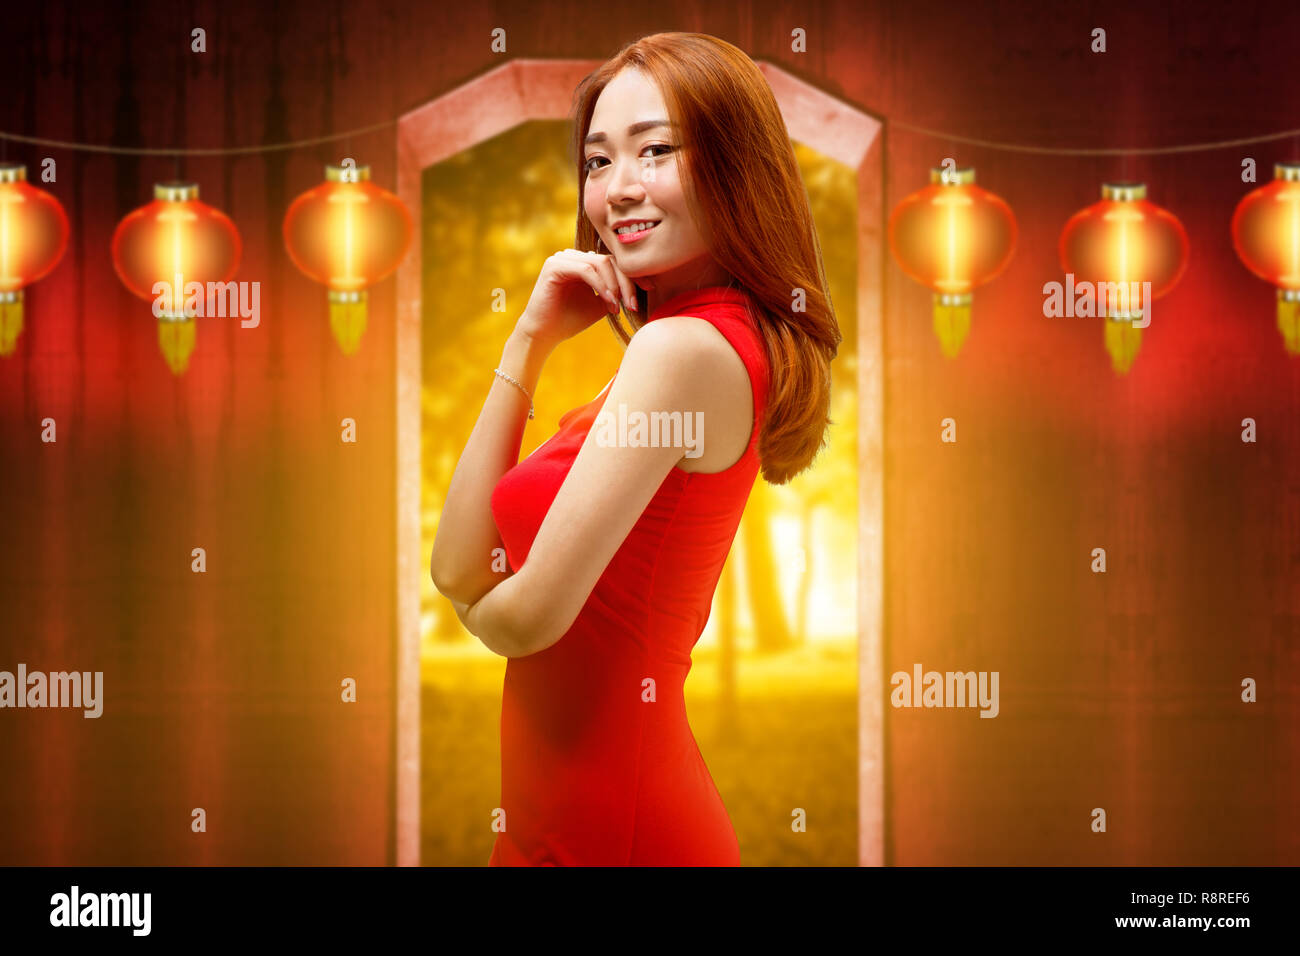 Happy chinese woman with traditional clothes posing against hanging lanterns on the background. Happy Chinese New Year Stock Photo